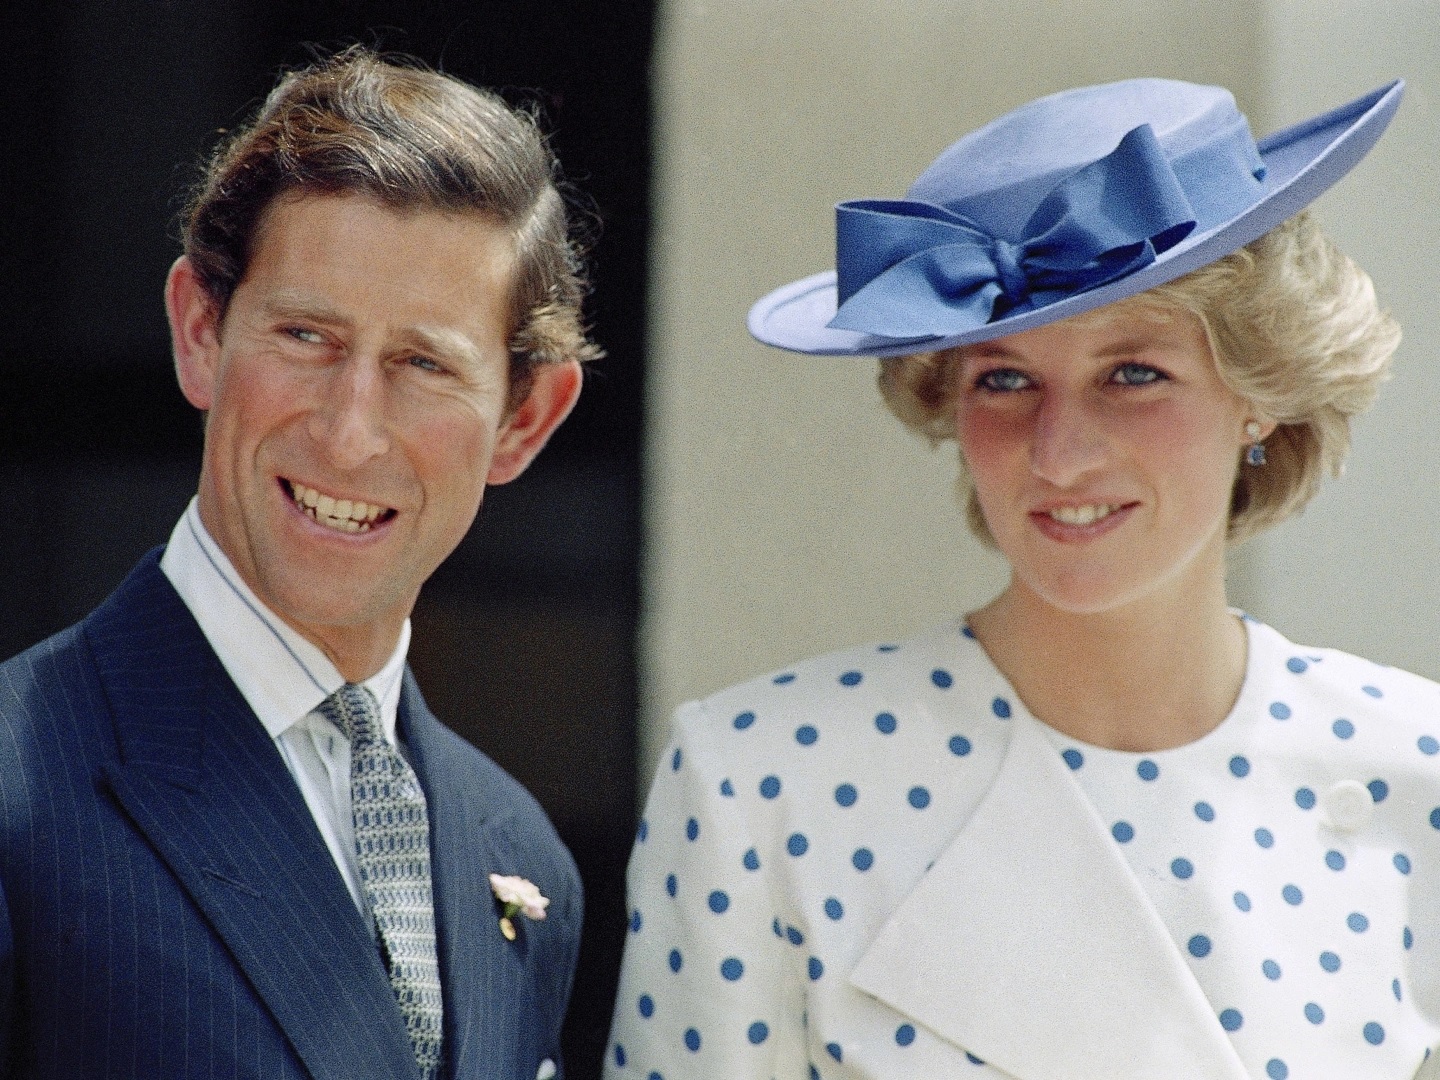 Imagined What Prince Charles said during Princess Diana's memorial service.